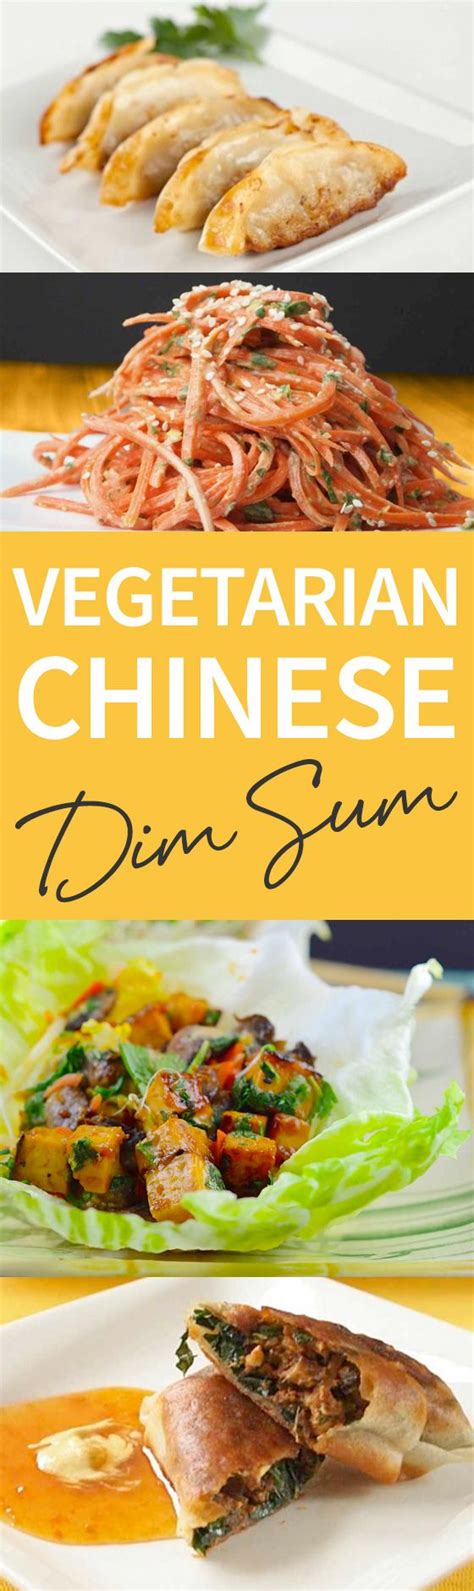 For english subtitles, click the captions button in the right corner of the video (2nd button from left, next to the. Vegetarian Chinese Dim Sum | Vegetarian dim sum, Vegetarian, Vegetarian recipes